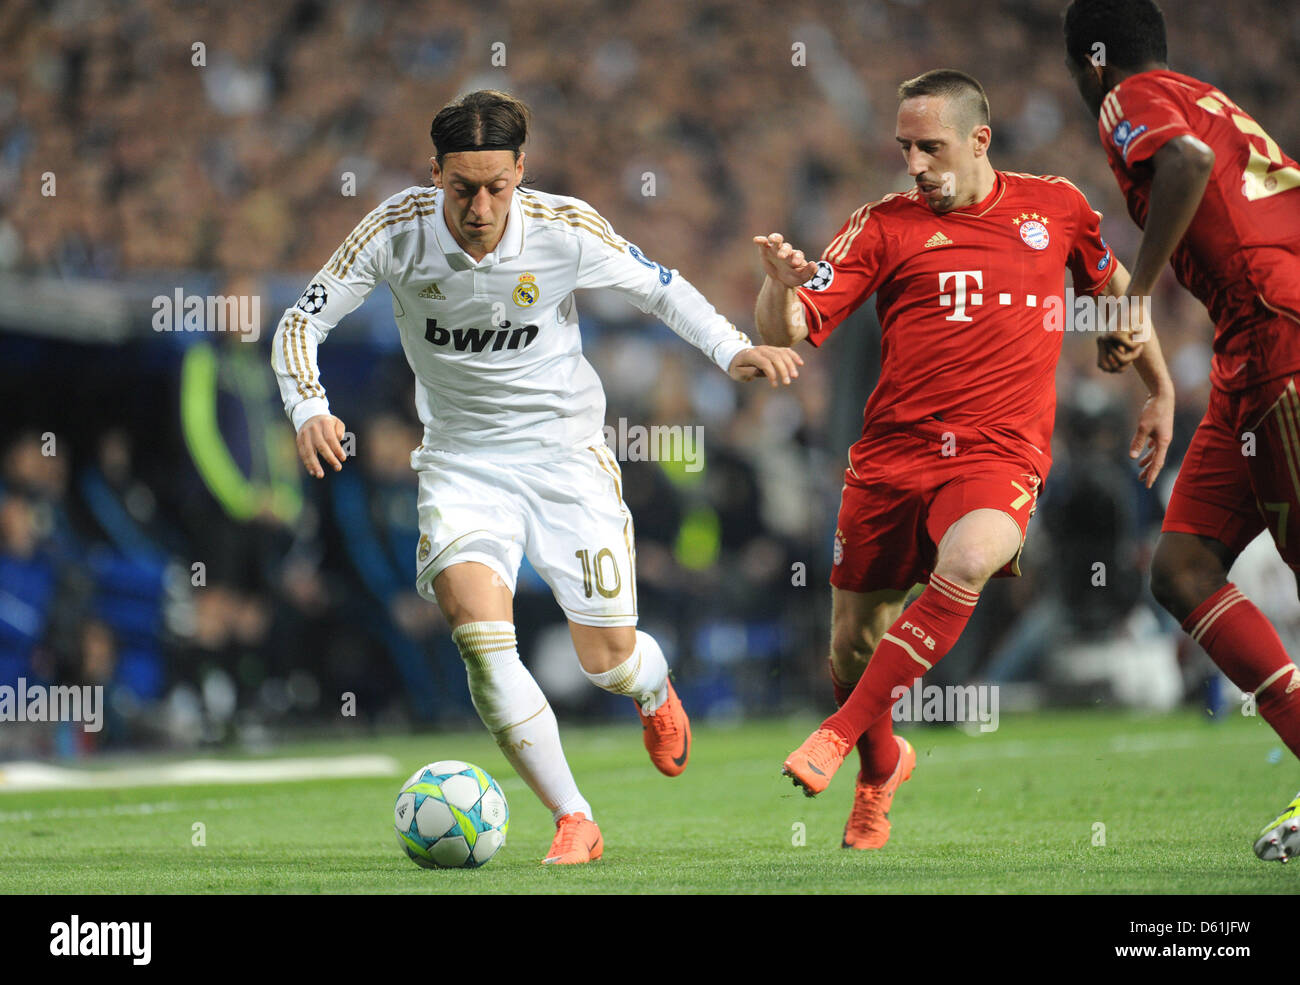 Munich's Franck Ribery and Madrid's Mesut Ozil vie for the ball during the Champions League semi final second leg soccer match between Real Madrid and FC Bayern Munich at the Santiago Bernabeu stadium in Madrid, Spain, 25 April 2012. Photo: Andreas Gebert Stock Photo